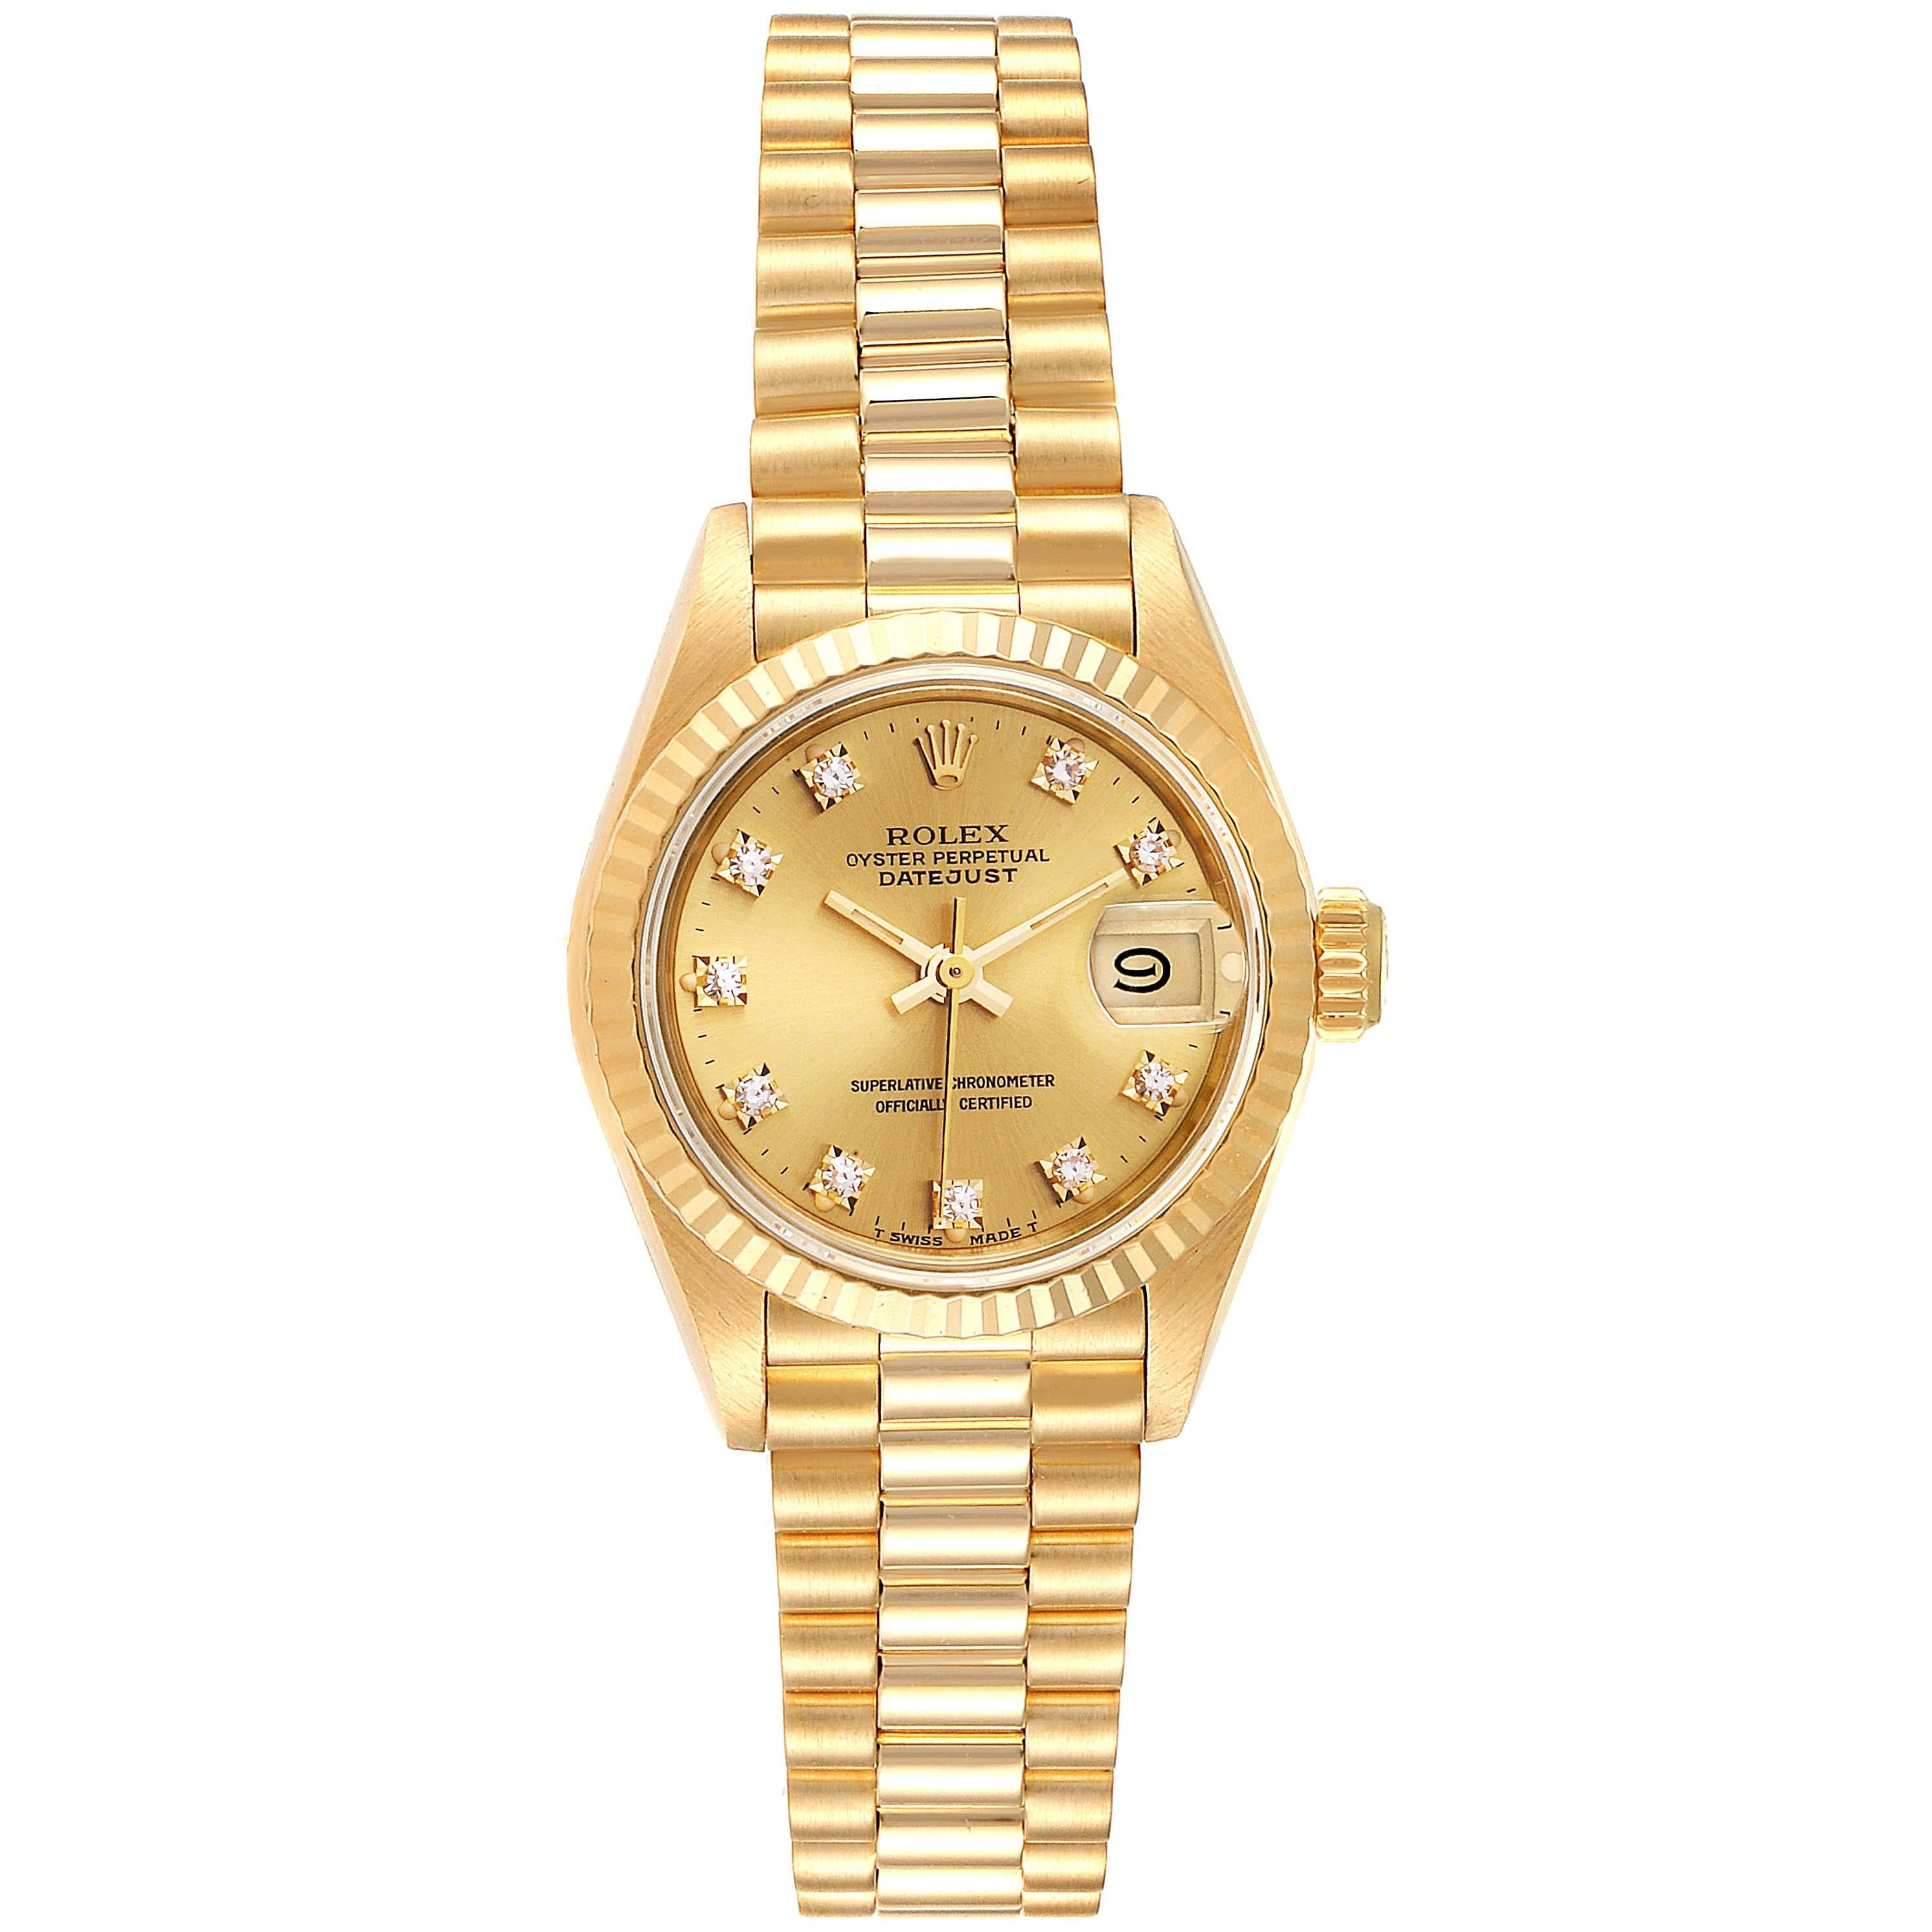 Rolex President Datejust Yellow Gold Diamond Ladies Watch 69178. Officially certified chronometer self-winding movement. 18k yellow gold oyster case 26.0 mm in diameter. Rolex logo on a crown. 18k yellow gold fluted bezel. Scratch resistant sapphire